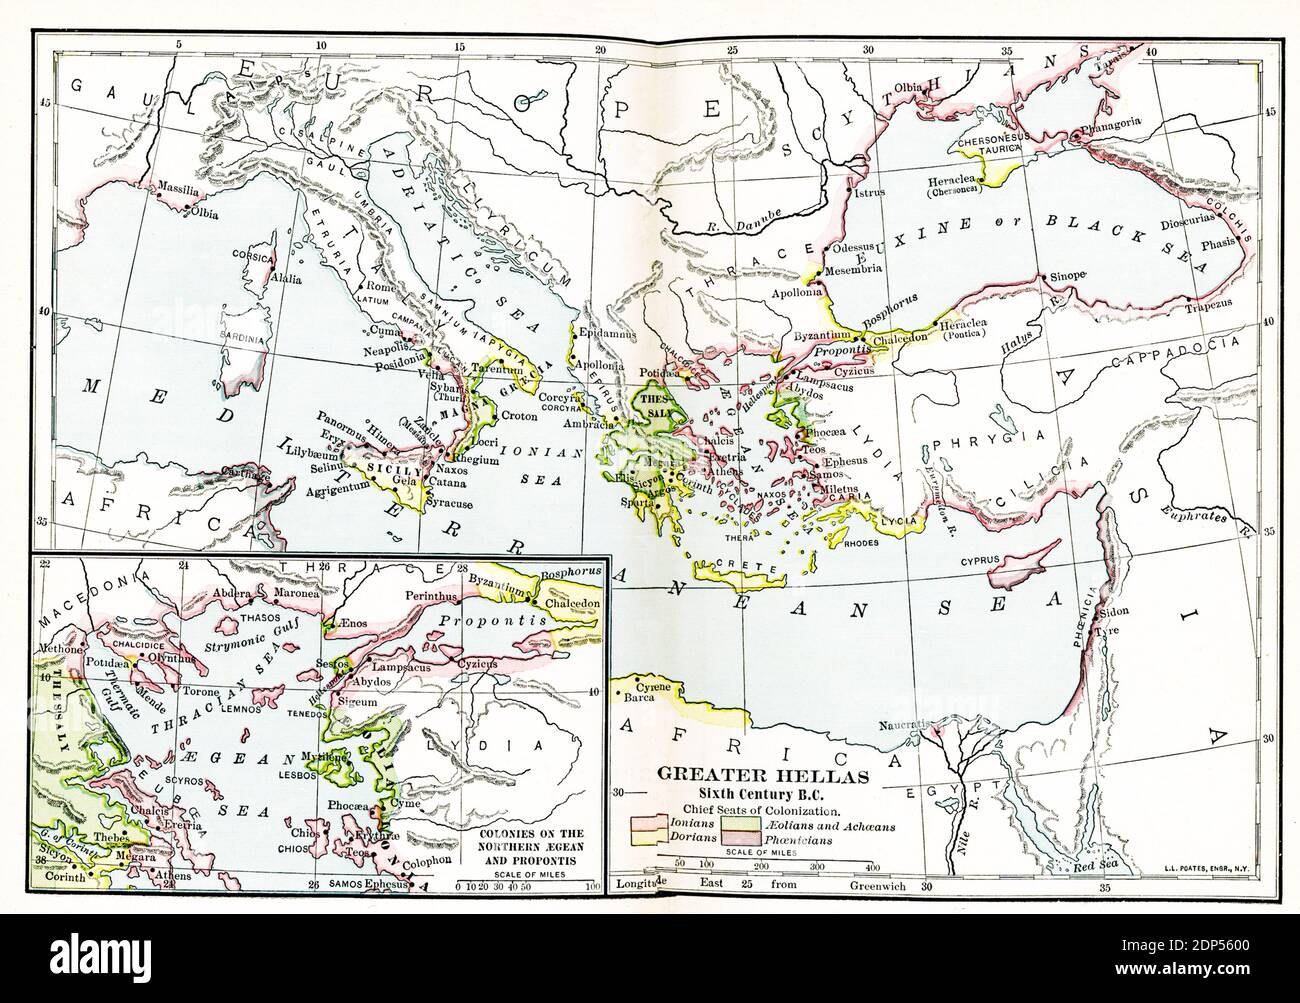 Greater Hellas Sixth Century B.C. The legend on this early 1900s map reads: Chief Seats of Colonization. Pink: Ionians; Green-Aeolians and Achaeans; Yellow-Dorians; Purple-Phoenicians.  Inset map: Colonies of the Northern Aegean and Propontis Stock Photo